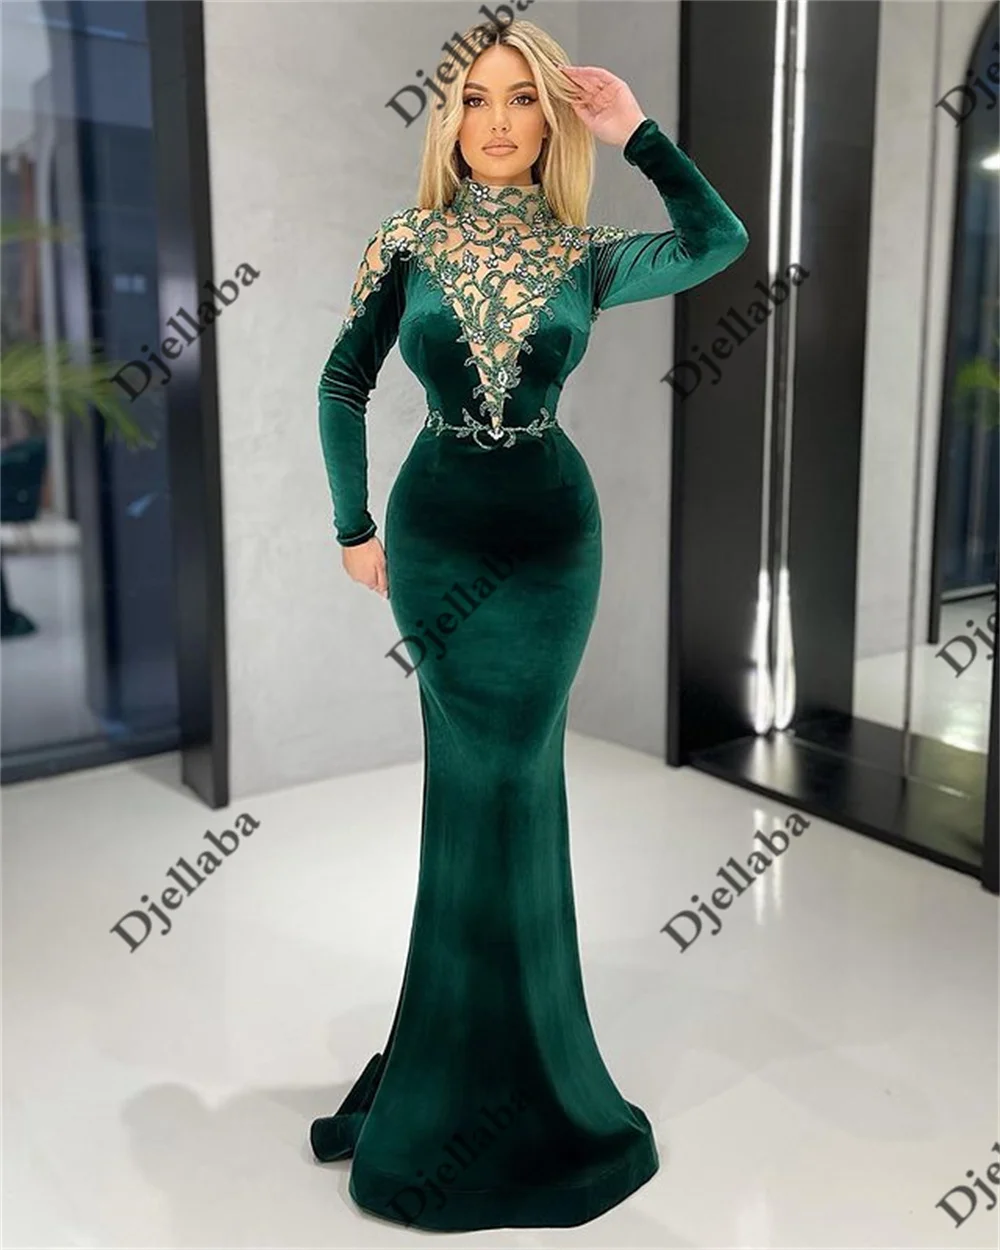 Luxury Green Velvet High Neck Long Sleeve Evening Dresses 2022 Mermaid Elegant Crystal Appliques For Women Party Gowns long evening gowns